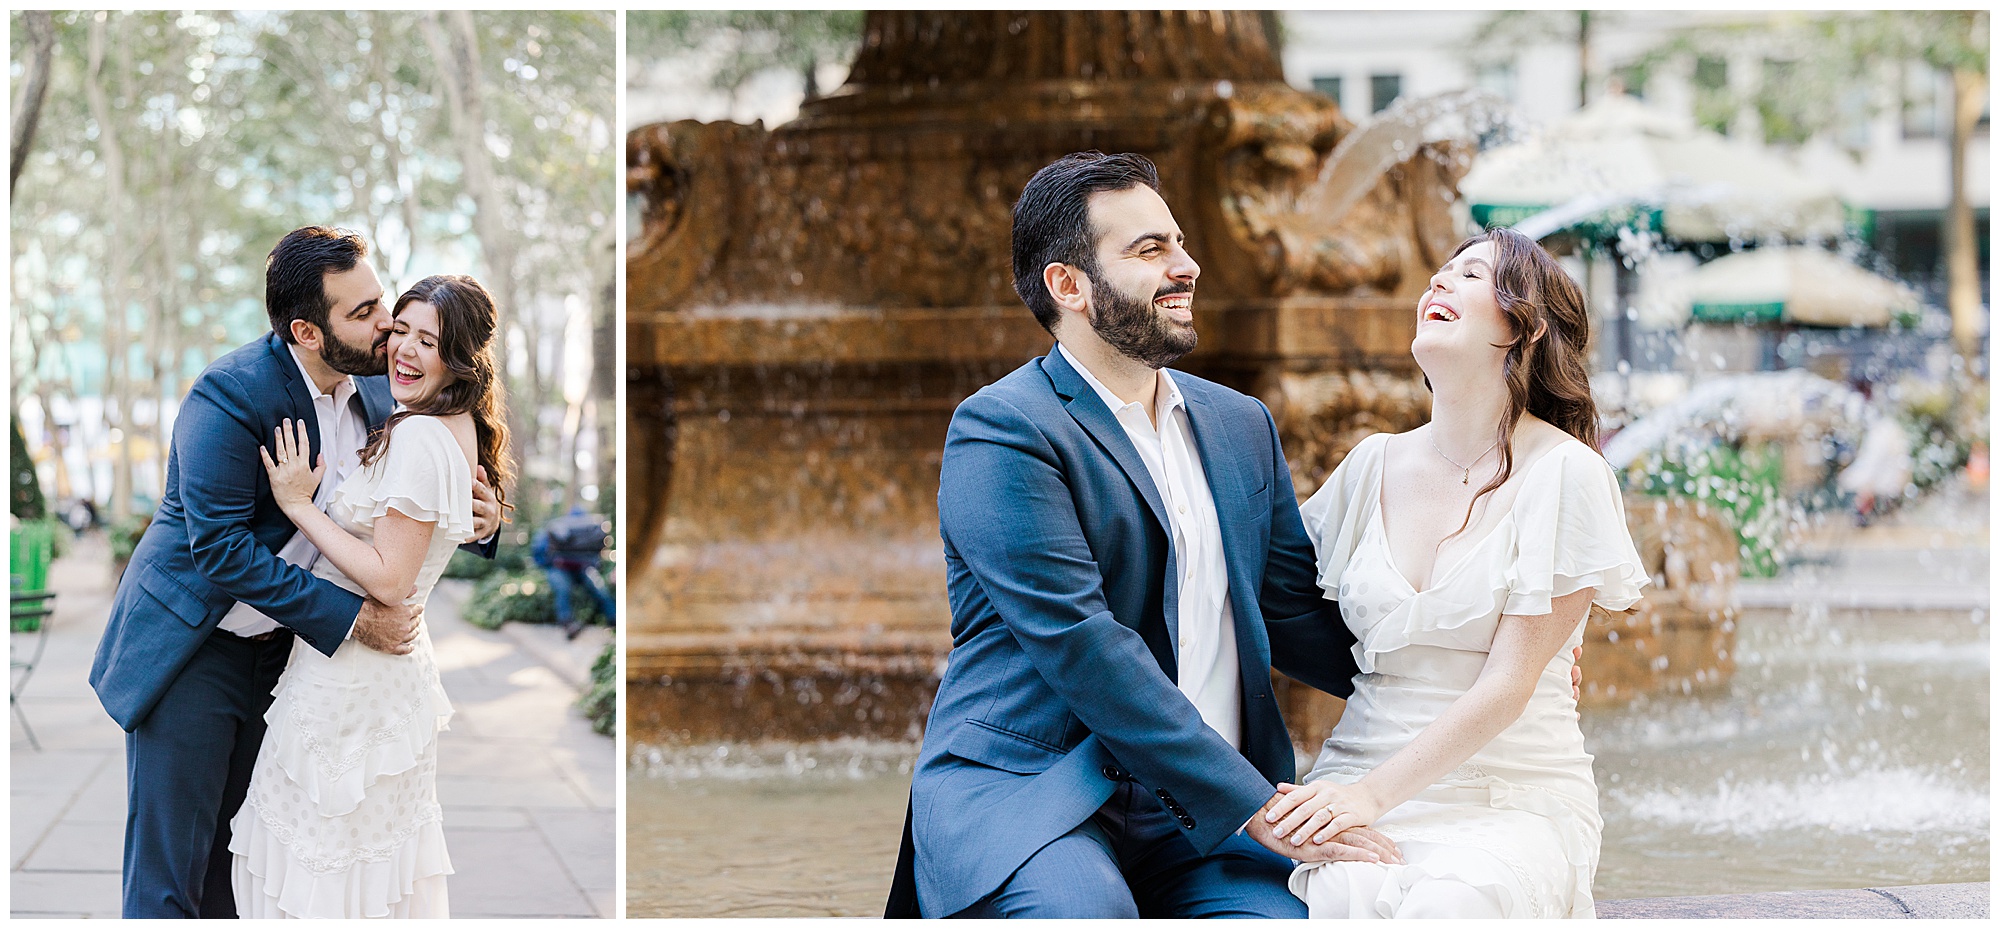 Stand-Out New York wedding photographers